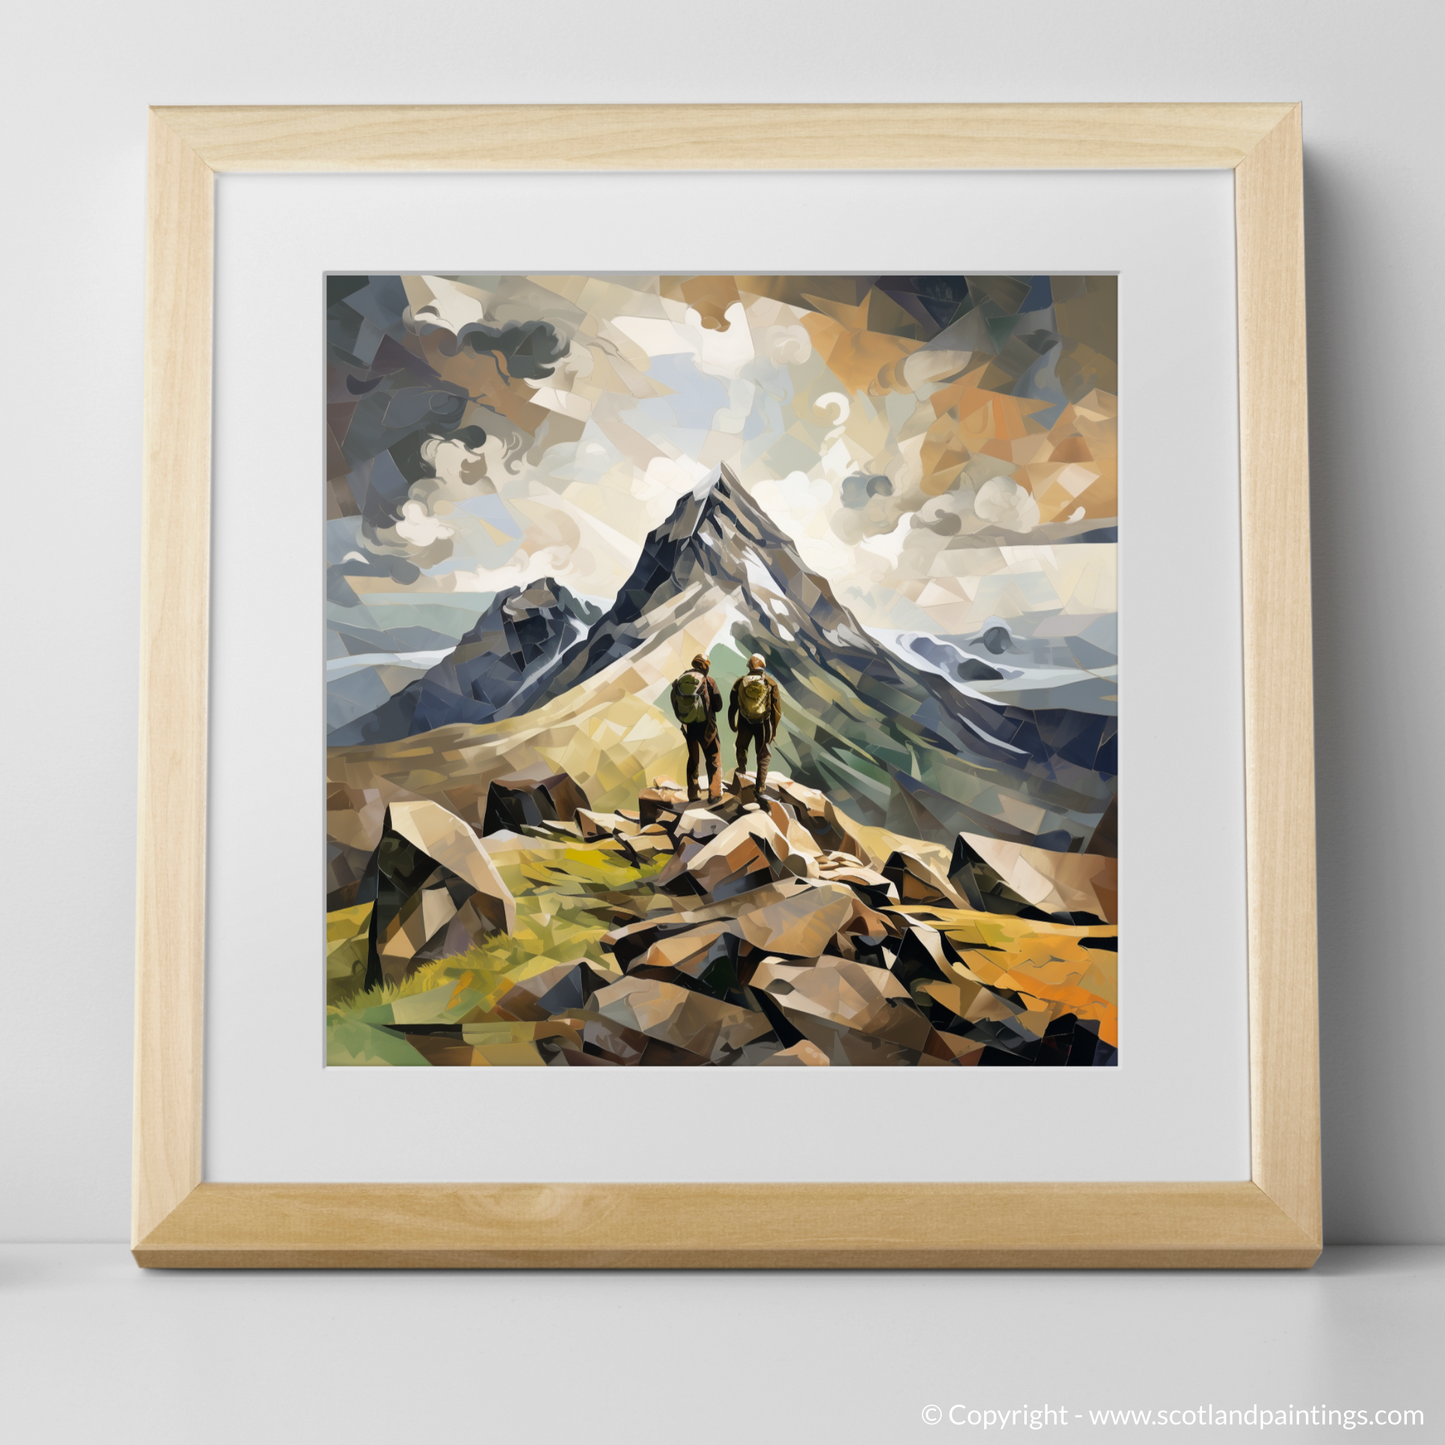 Cubist Summit: A Geometric Ode to Buachaille and the Highlands